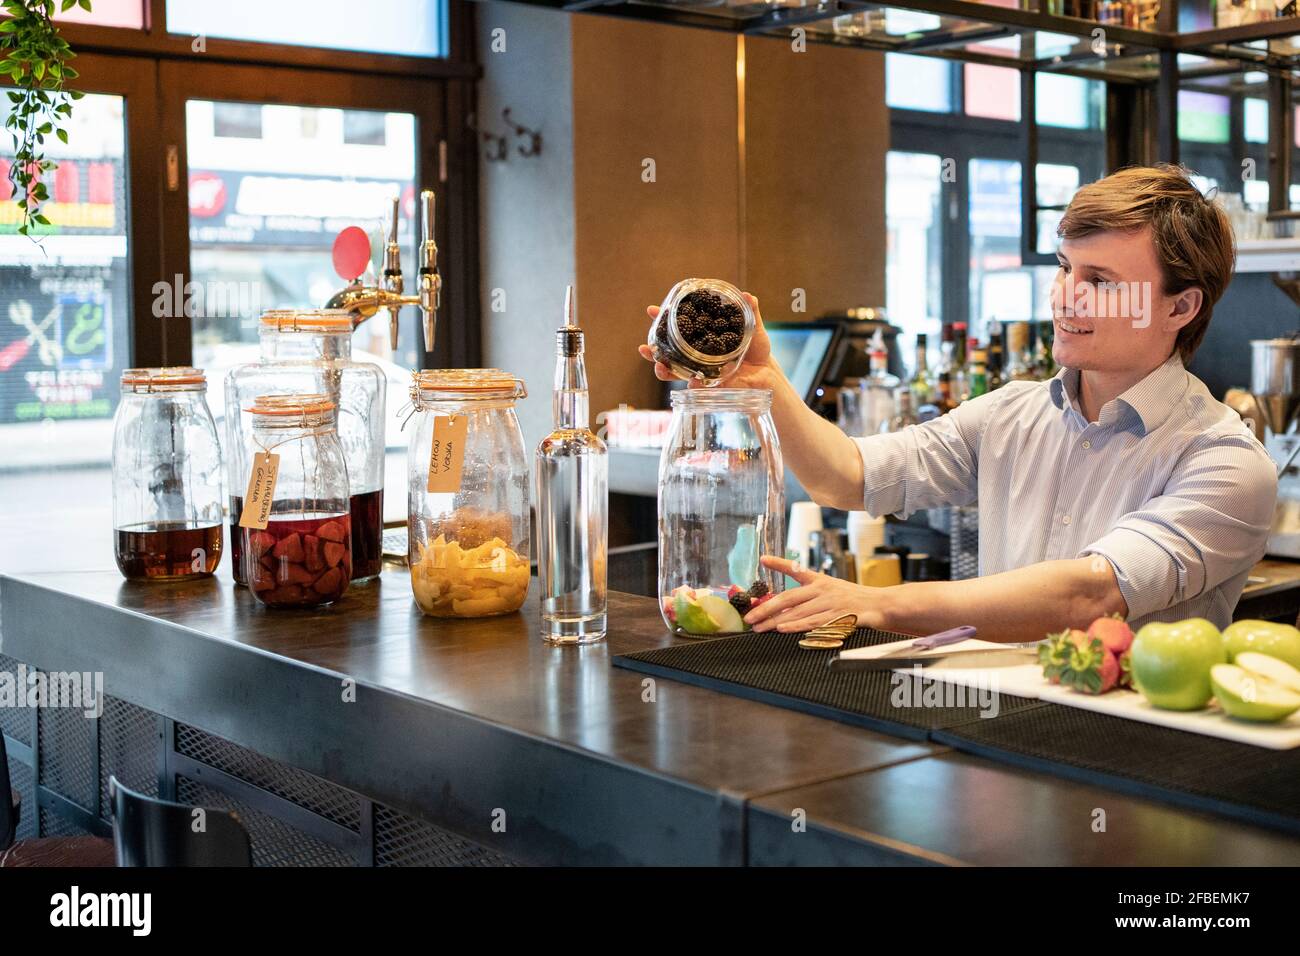 Male trainee putting blackberries in glass jar at bar counter Stock Photo